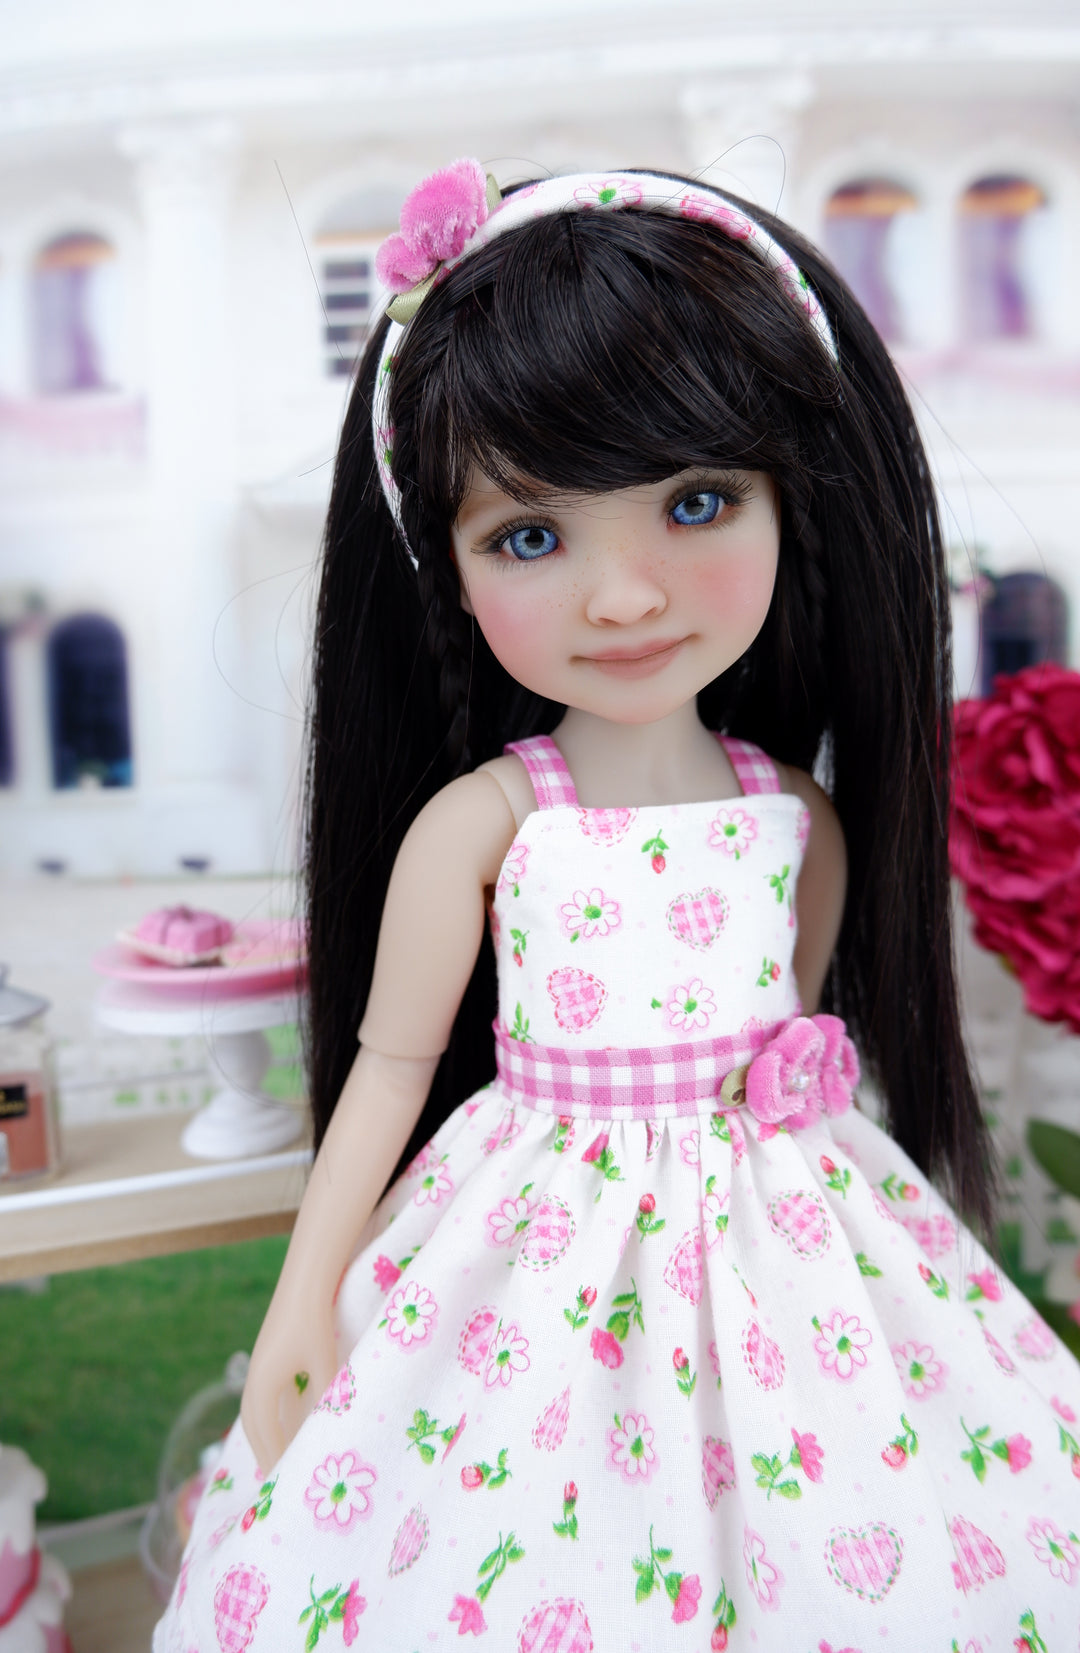 Smitten - dress with shoes for Ruby Red Fashion Friends doll